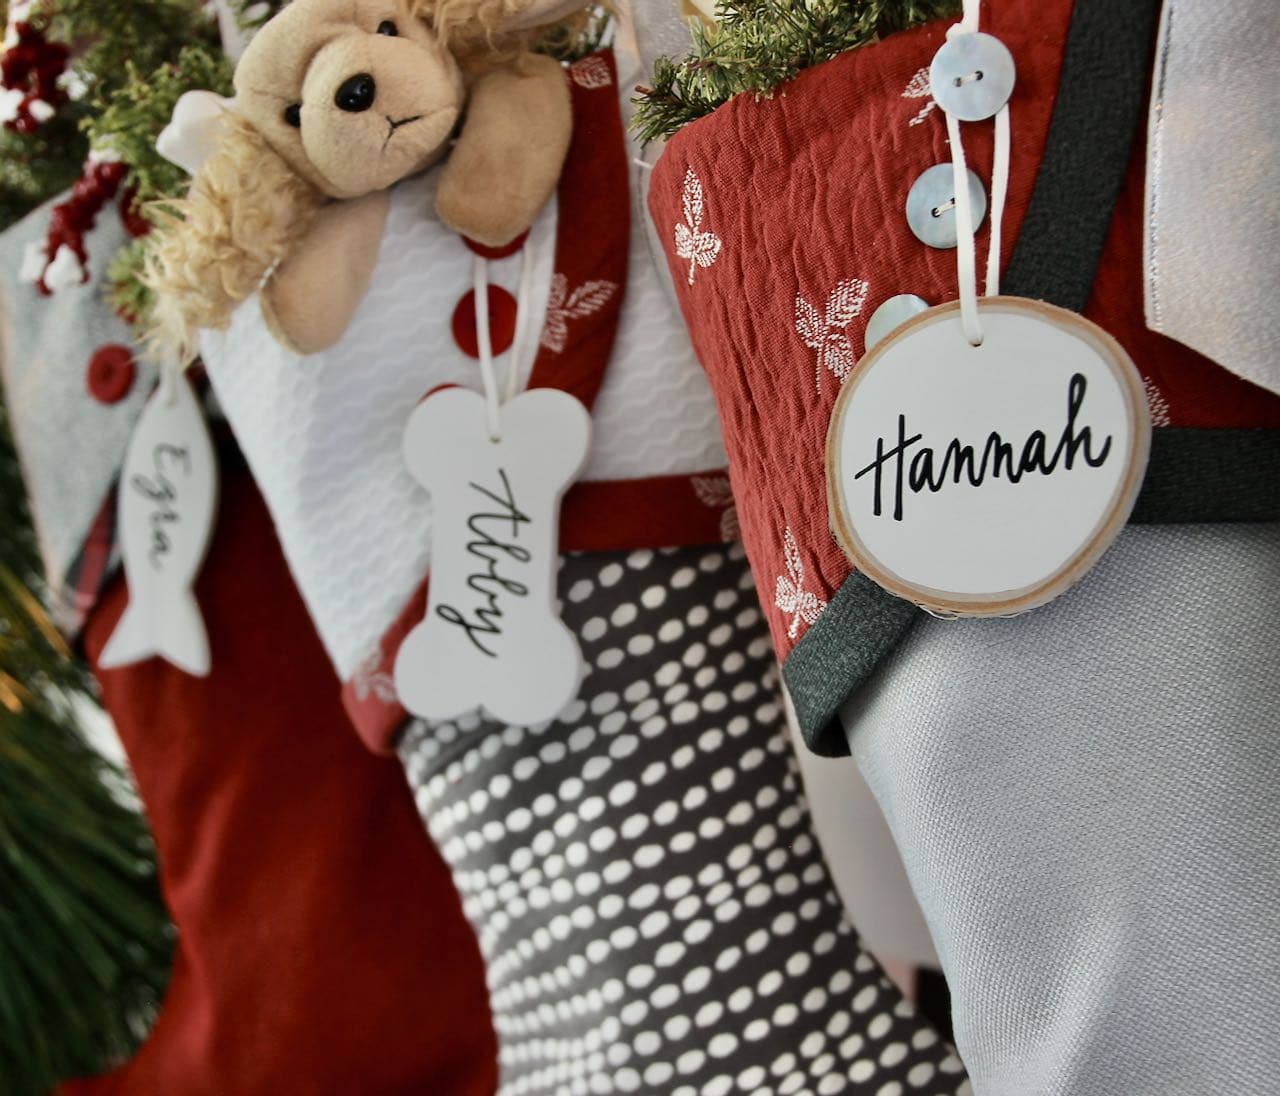 Preppy Christmas Stockings in Red, Gray and White